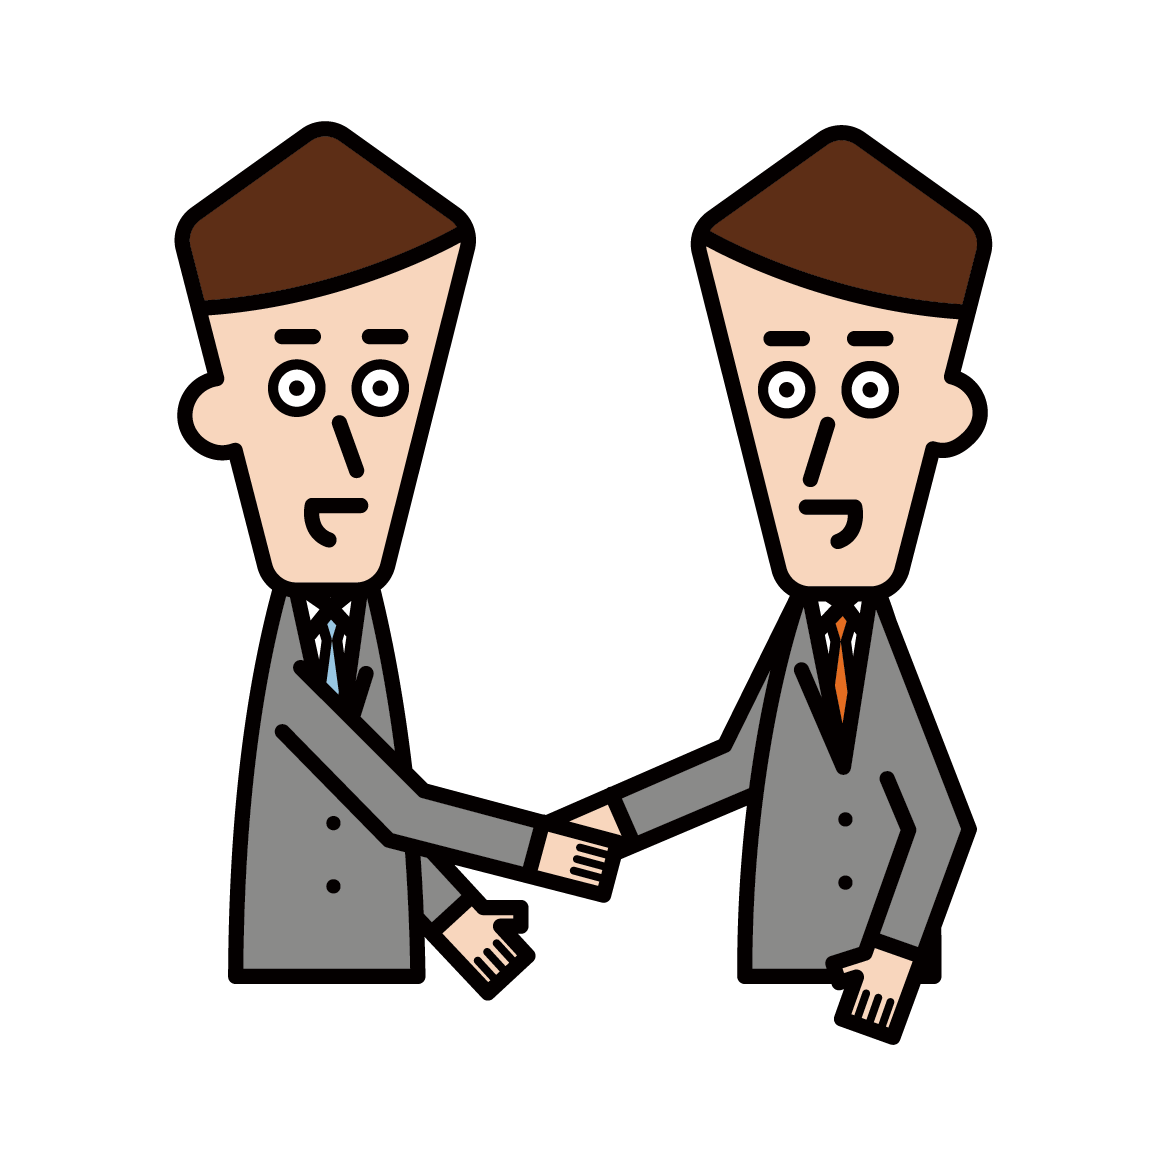 Illustration of a person shaking hands and trusting relationship (male)